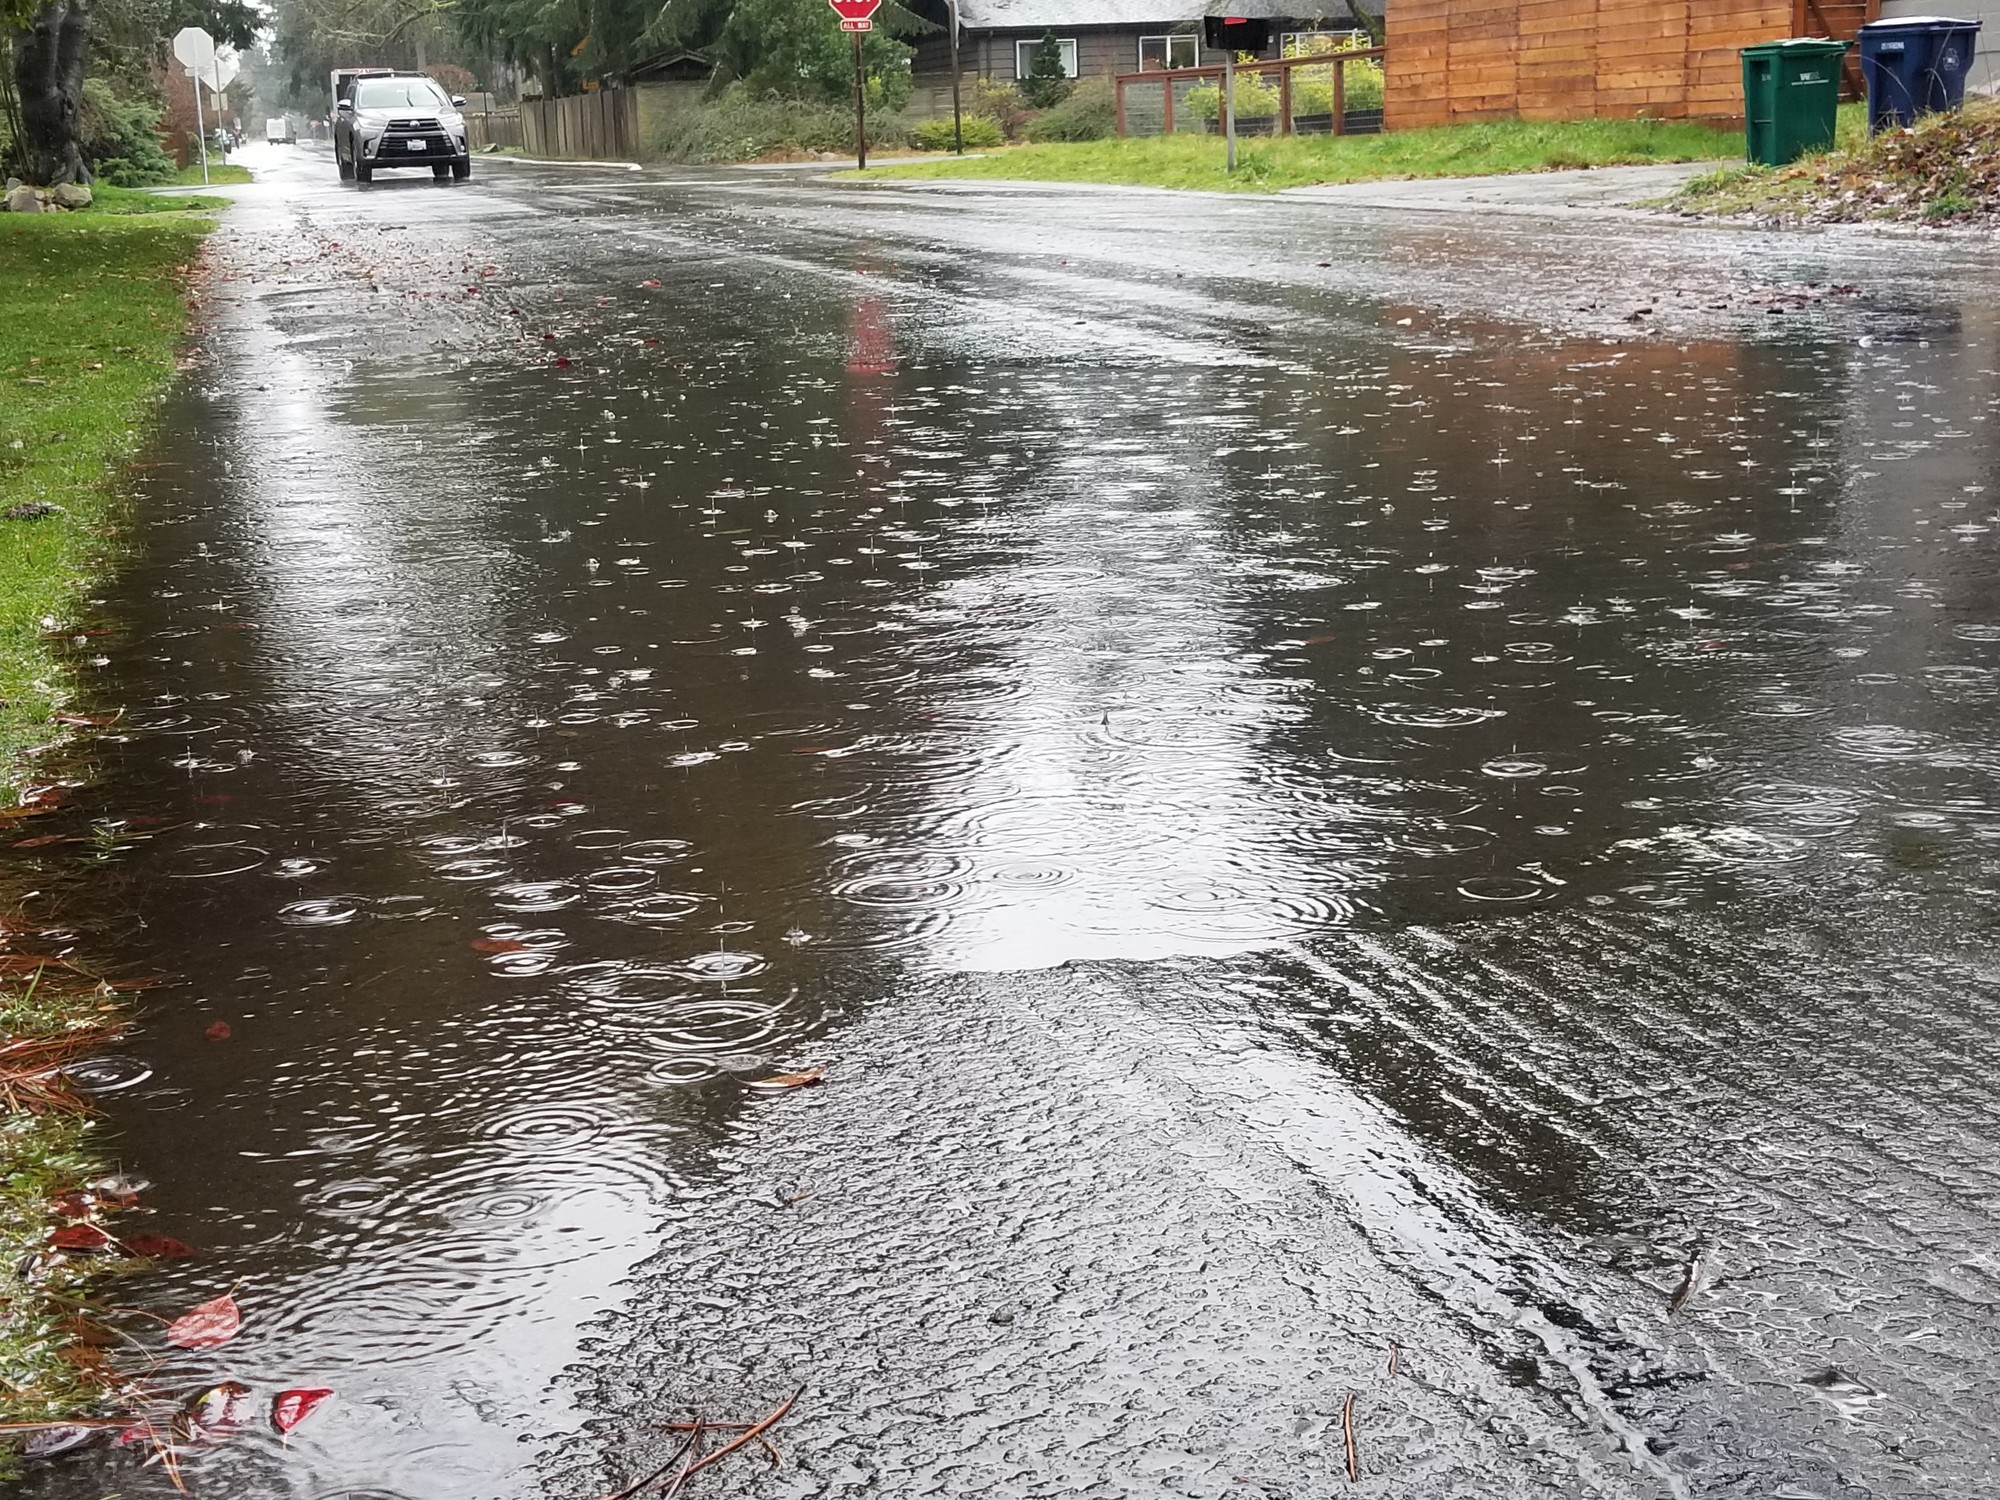 Flooding over a road with a car in the background